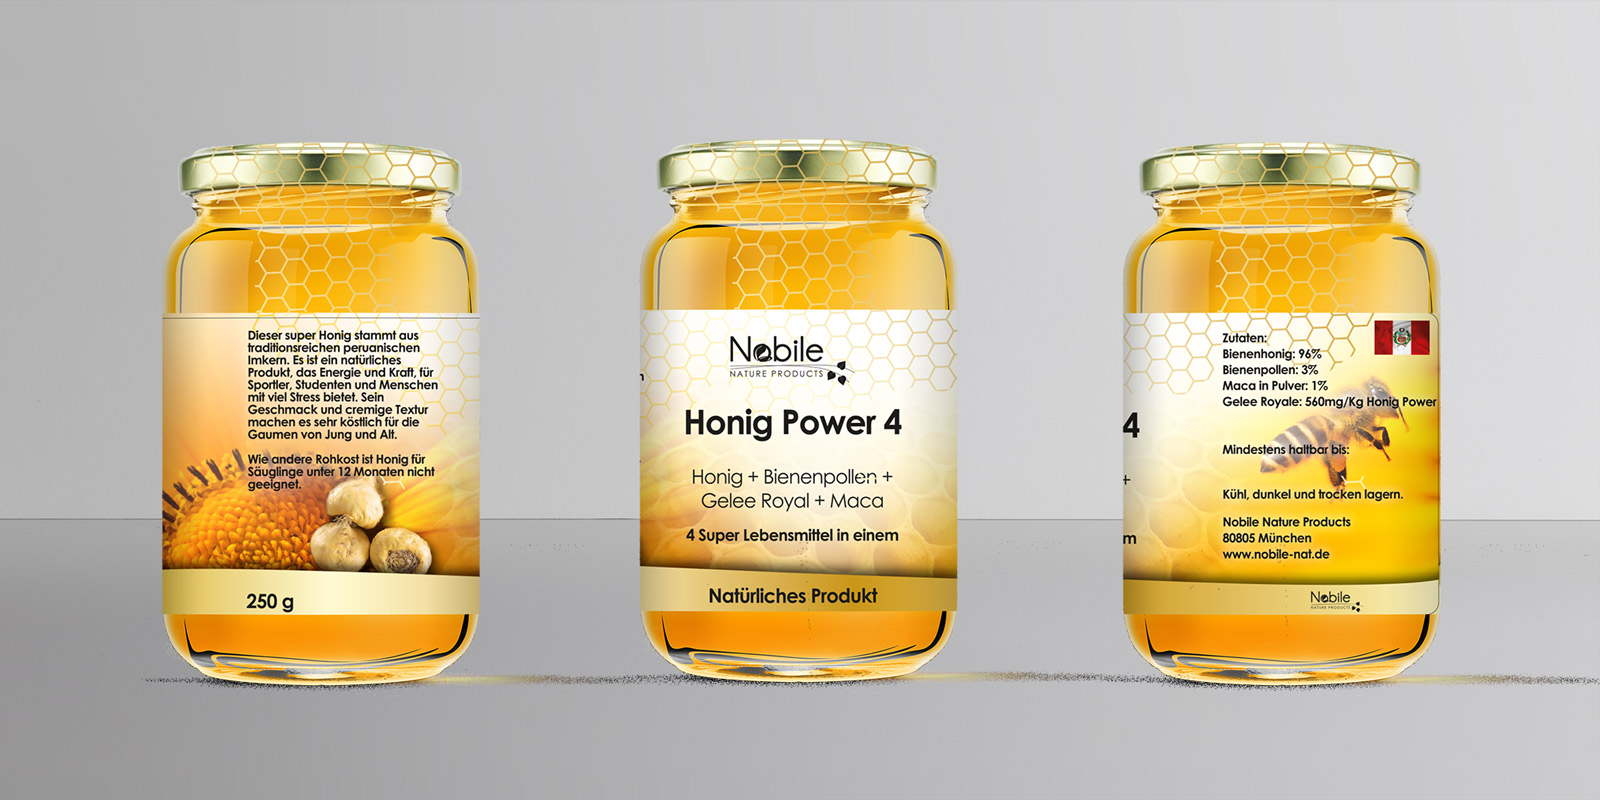 Graphic and creative design of product labels for Honey from the company Nobile Nature Products in Germany